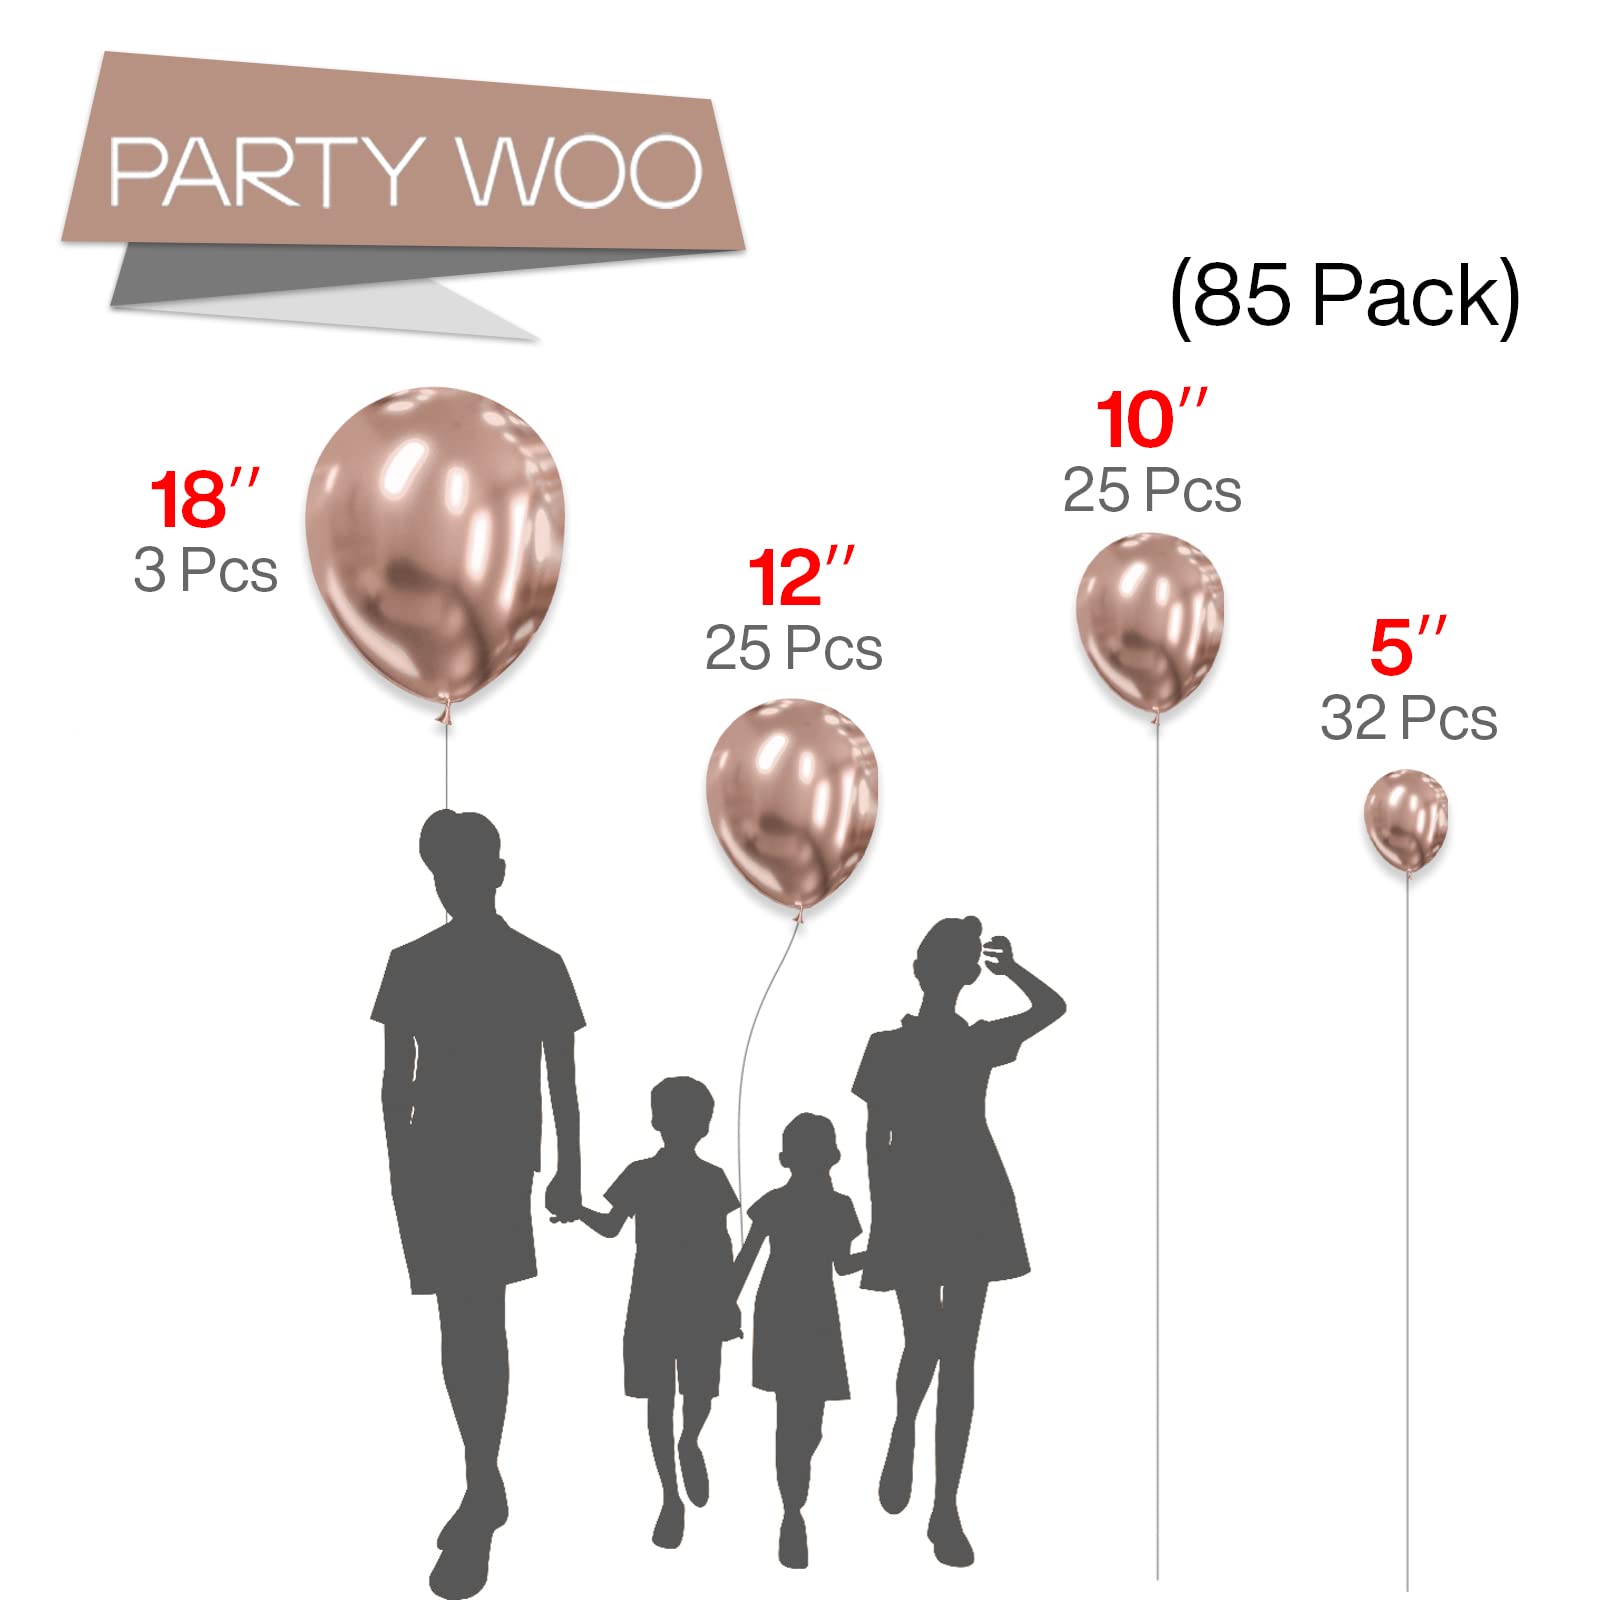 PartyWoo Metallic Champagne Gold Balloons, 85 pcs Champagne Gold Balloons Different Sizes Pack of 18 Inch 12 Inch 10 Inch 5 Inch Balloons for Balloon Garland as Party Decorations, Champagne Gold-G112